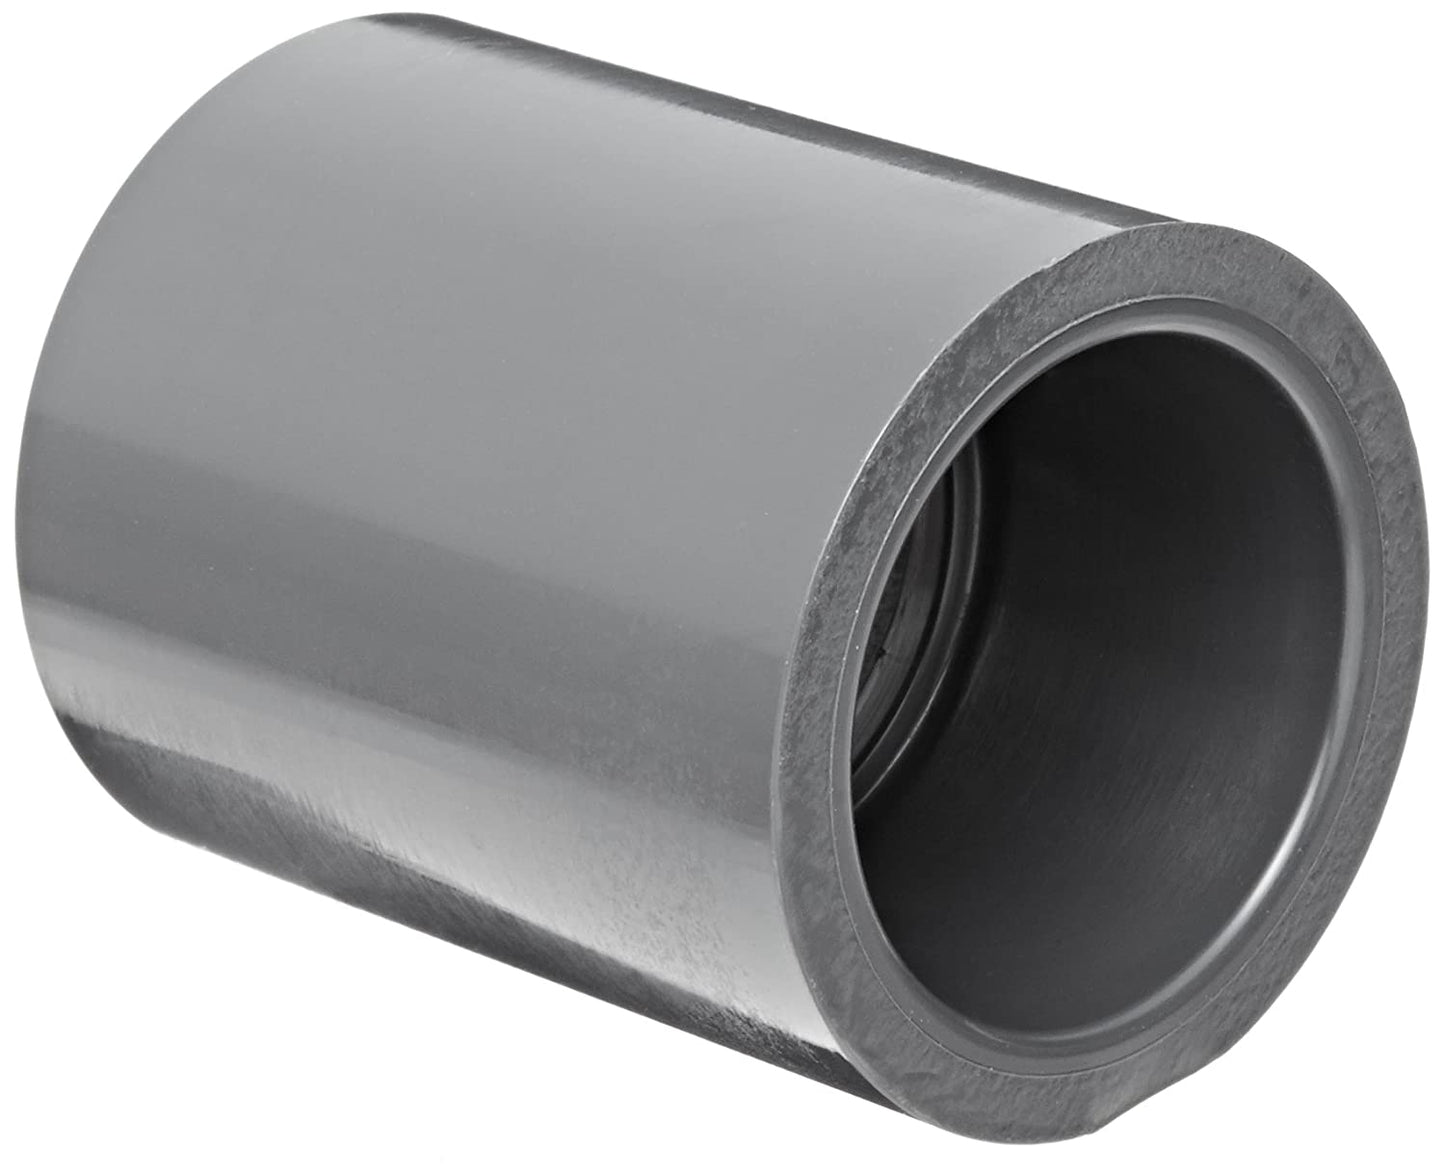 829-030 - PVC Pipe Fitting, Coupling, Schedule 80, 3" Socket